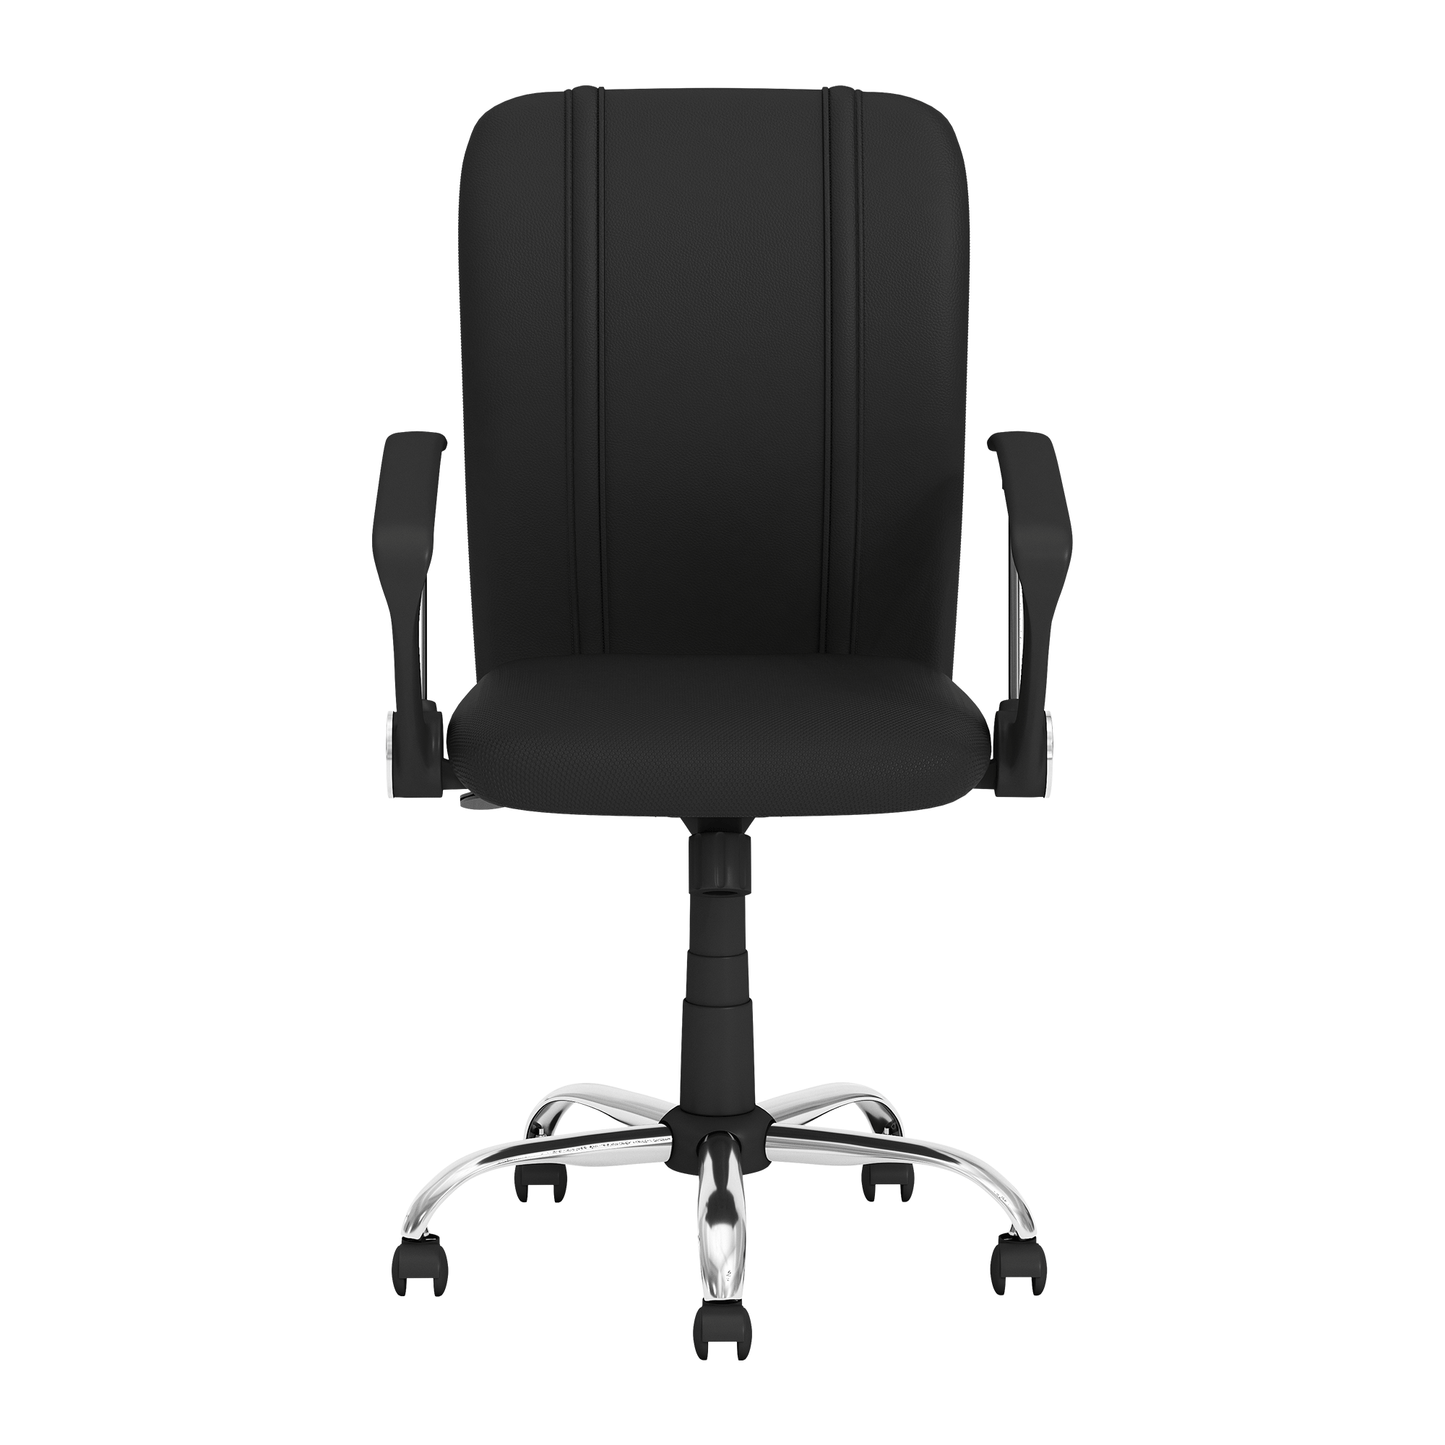 Curve Task Chair with Washington Nationals 2019 Champions